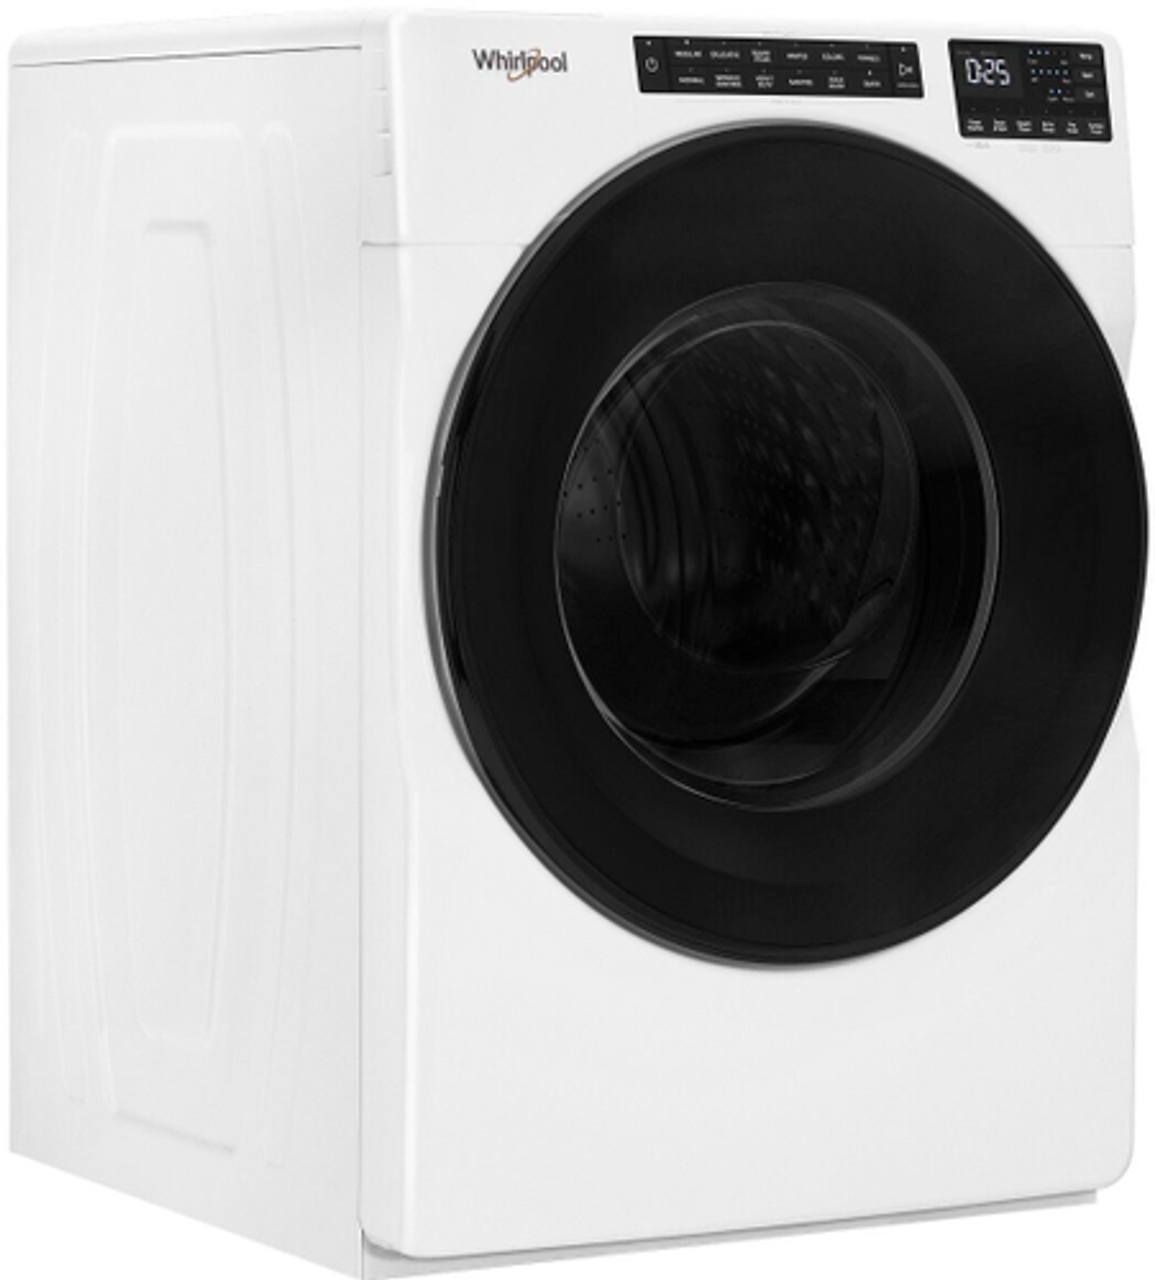 Whirlpool - 4.5 Cu. Ft. High-Efficiency Stackable Front Load Washer with Steam and Quick Wash Cycle - White